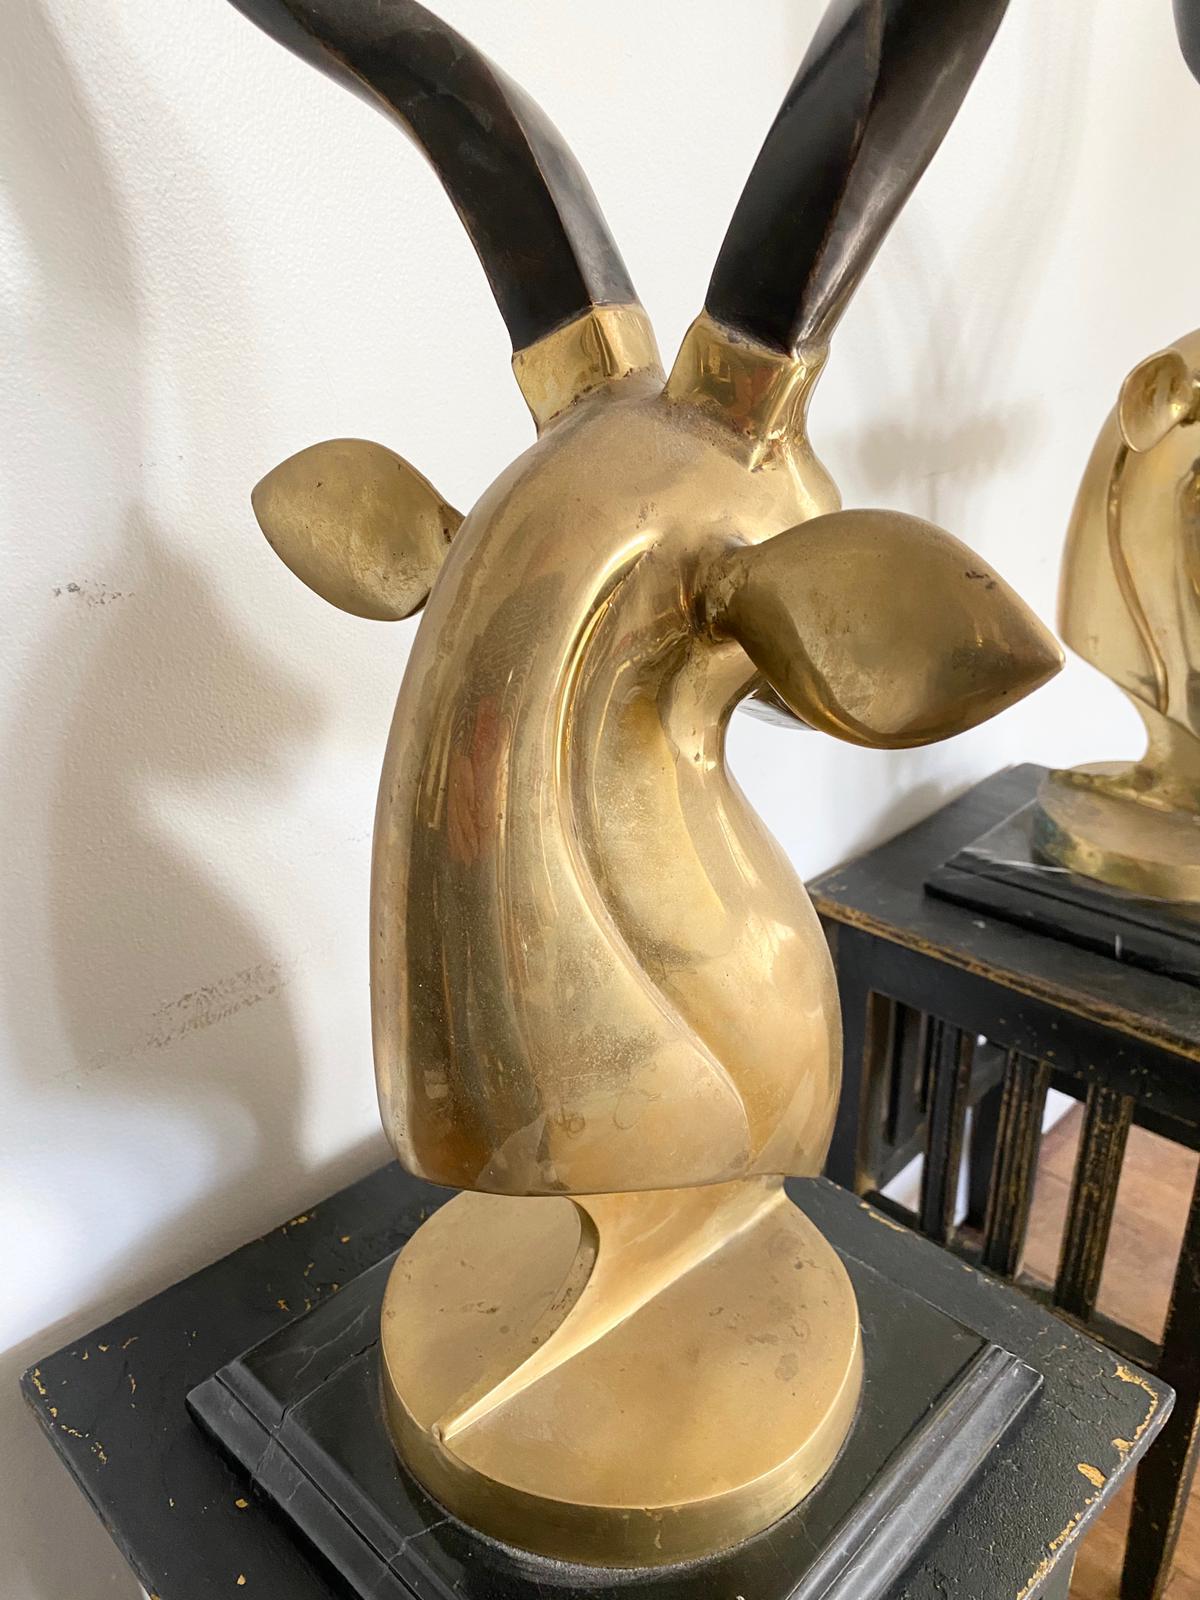 A fine pair of Kudu, antelope head sculptures, made in brass on a marble base, these make a stunning impact in a room.
A true Hollywood Regency pair of sculptures with dominating impact.
  